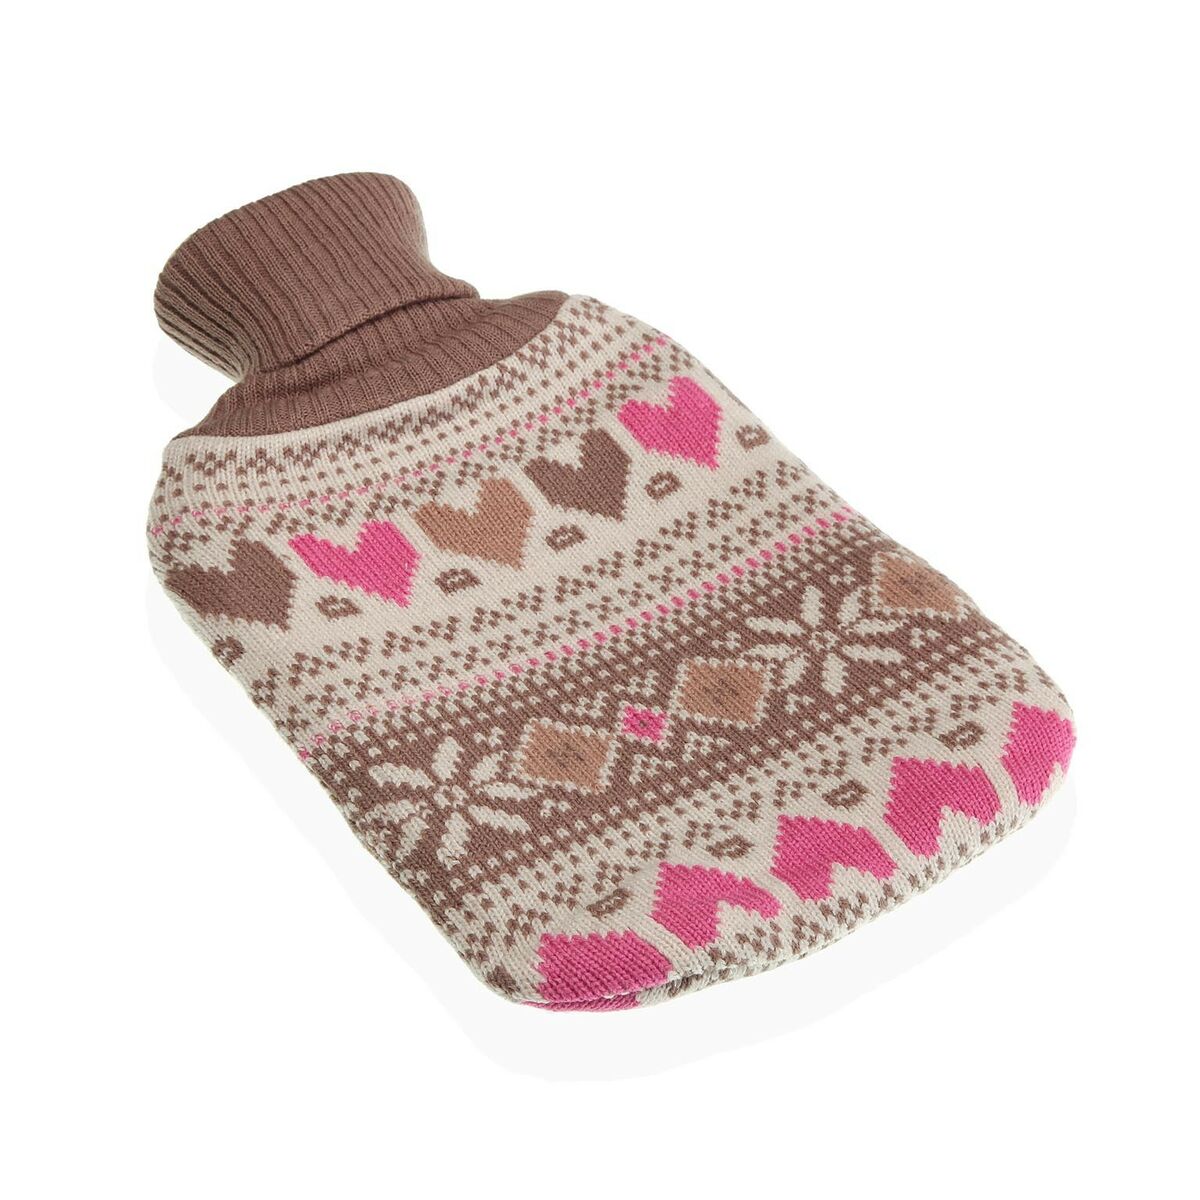 Hot Water Bottle Versa Holiday 2 L Textile - Calm Beauty IE